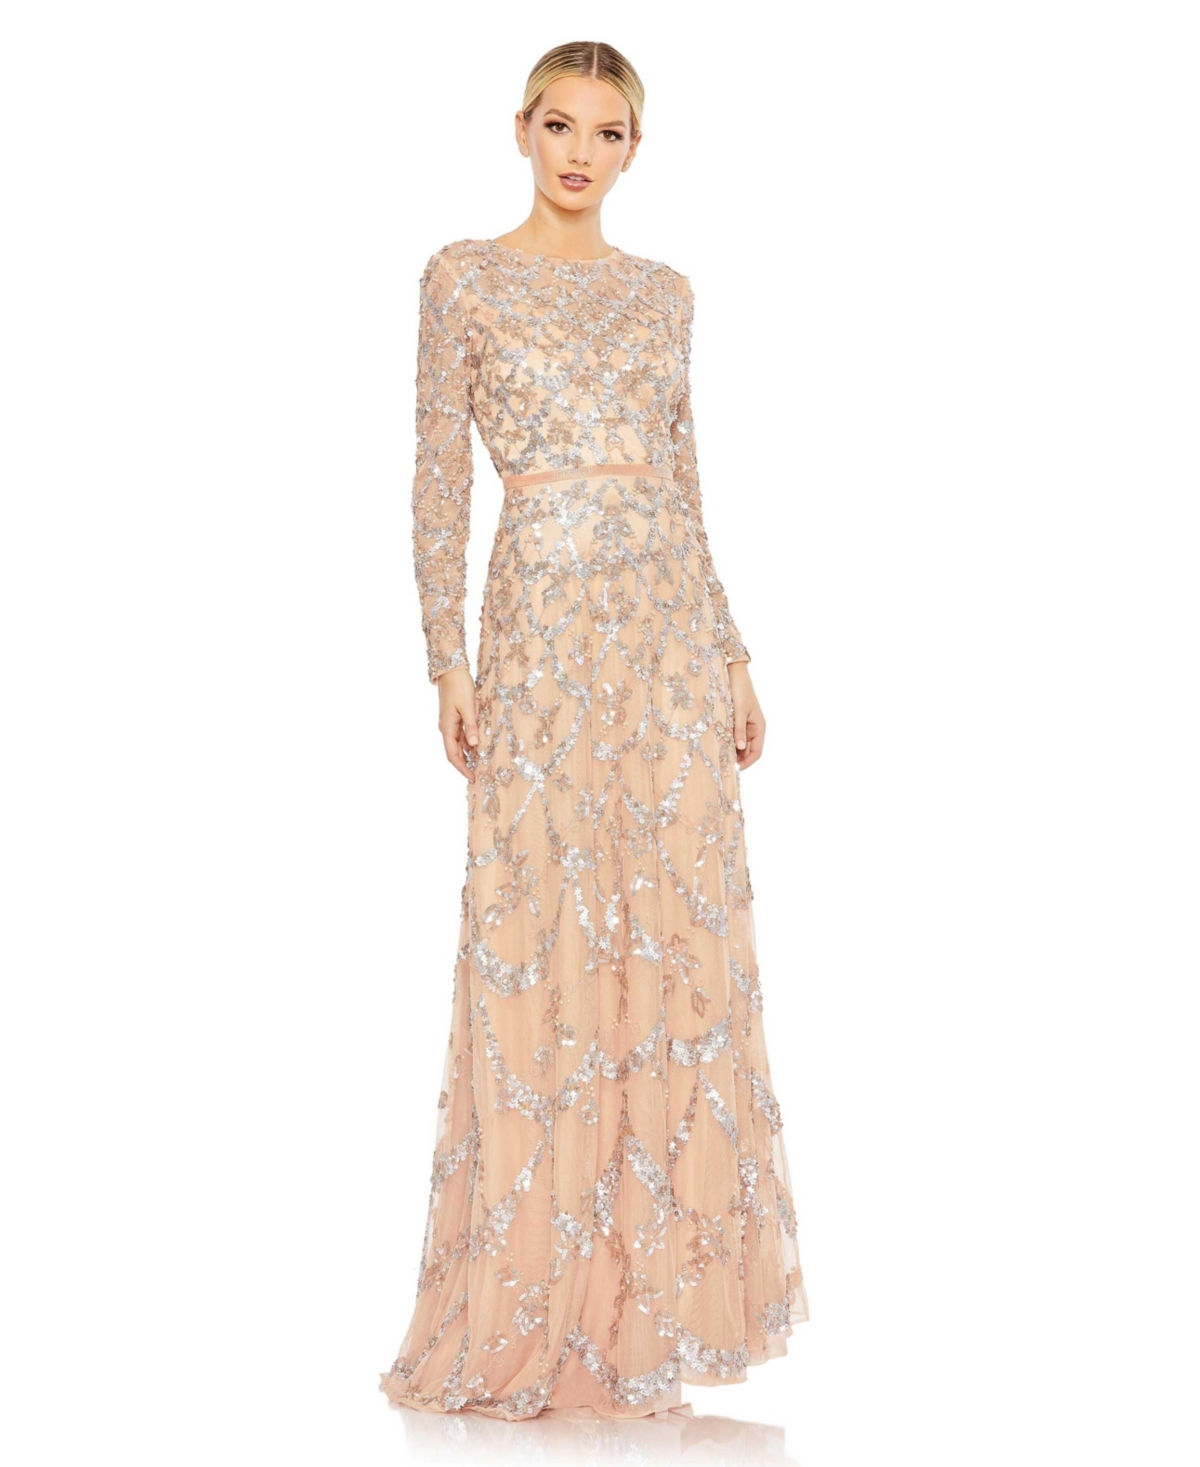 Women's Embellished Illusion High Neck Long Sleeve A Line Gown - Blush